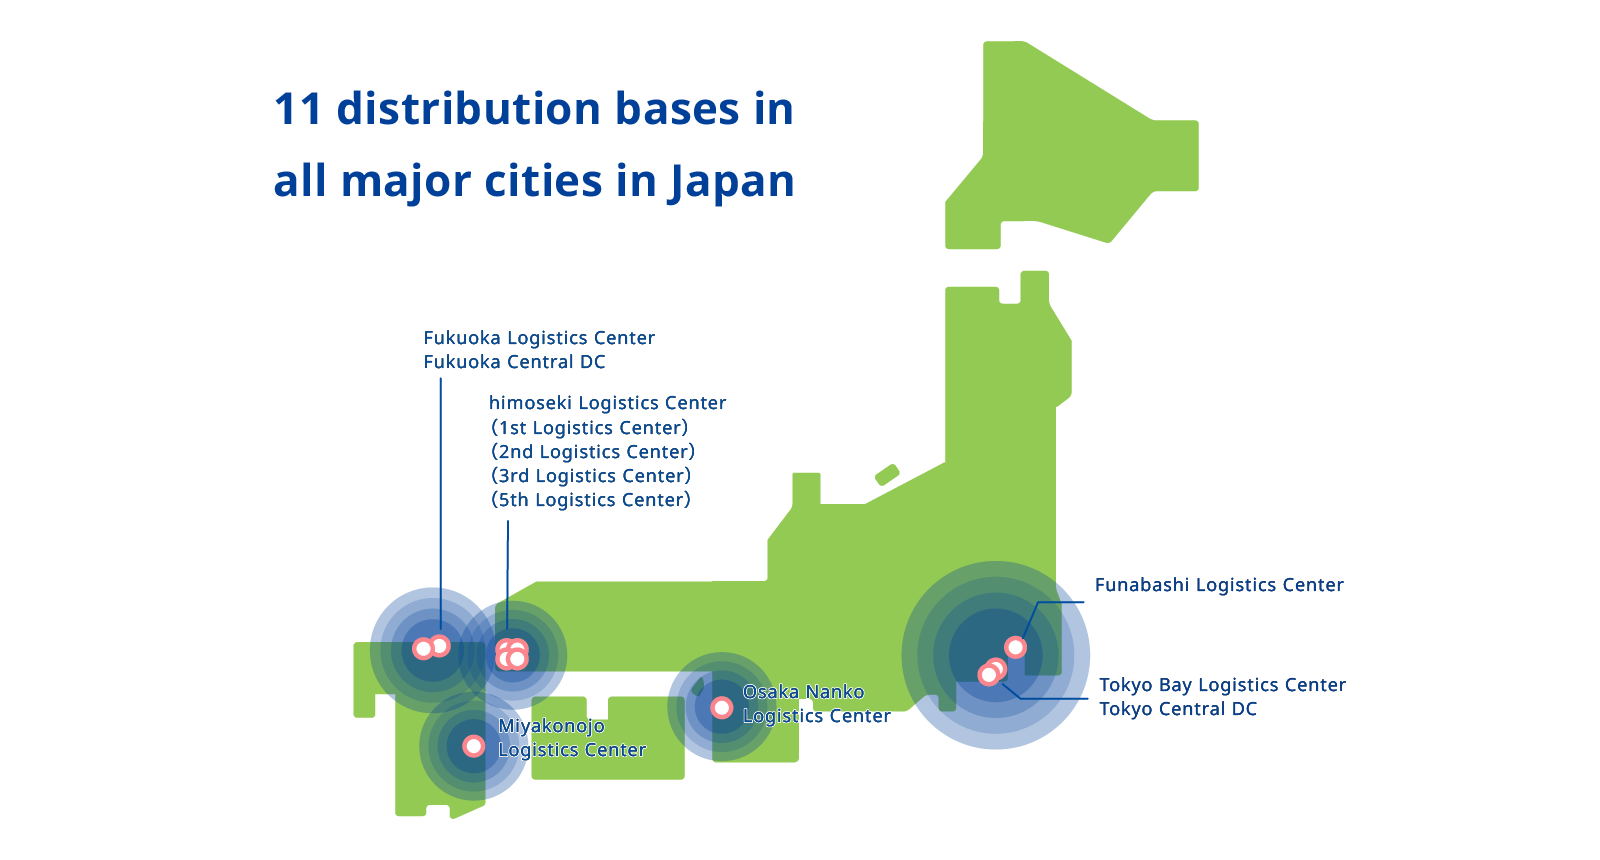 11 distribution bases in all major cities in Japan